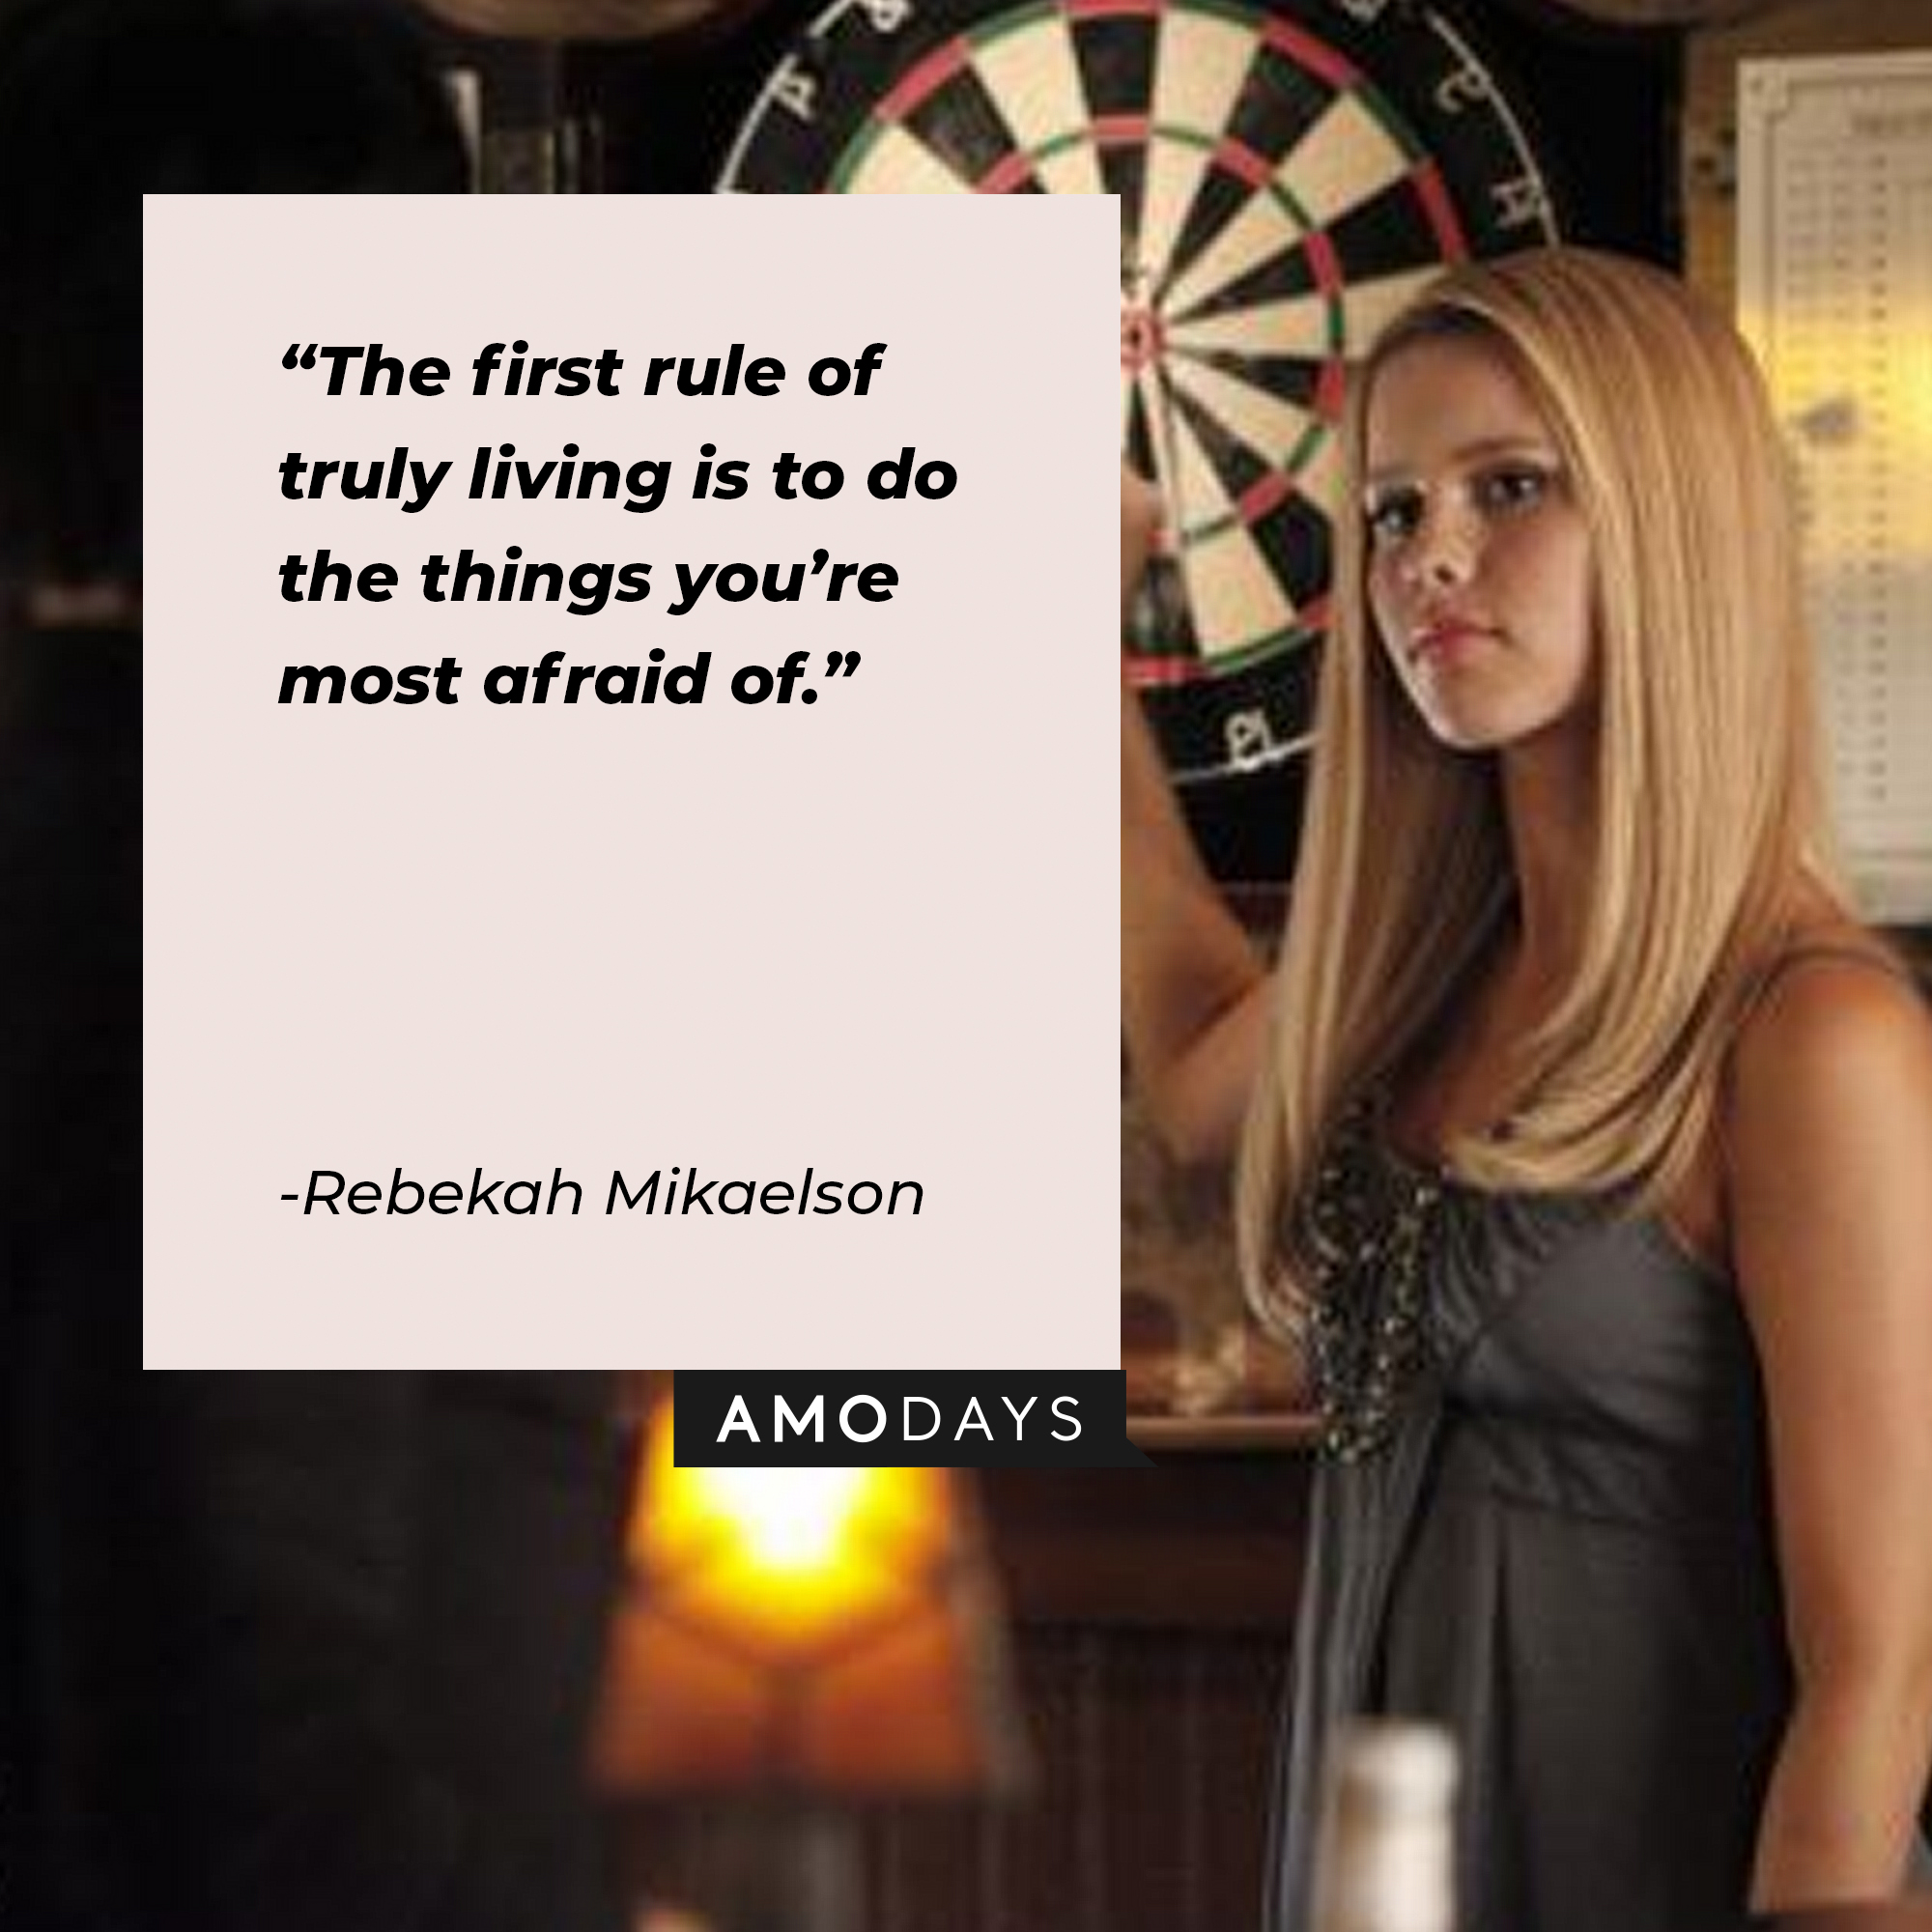 An image of Rebekah Mikaelson with her quote “The first rule of truly living is to do the things you’re most afraid of.” | Source: facebook.com/thevampirediaries